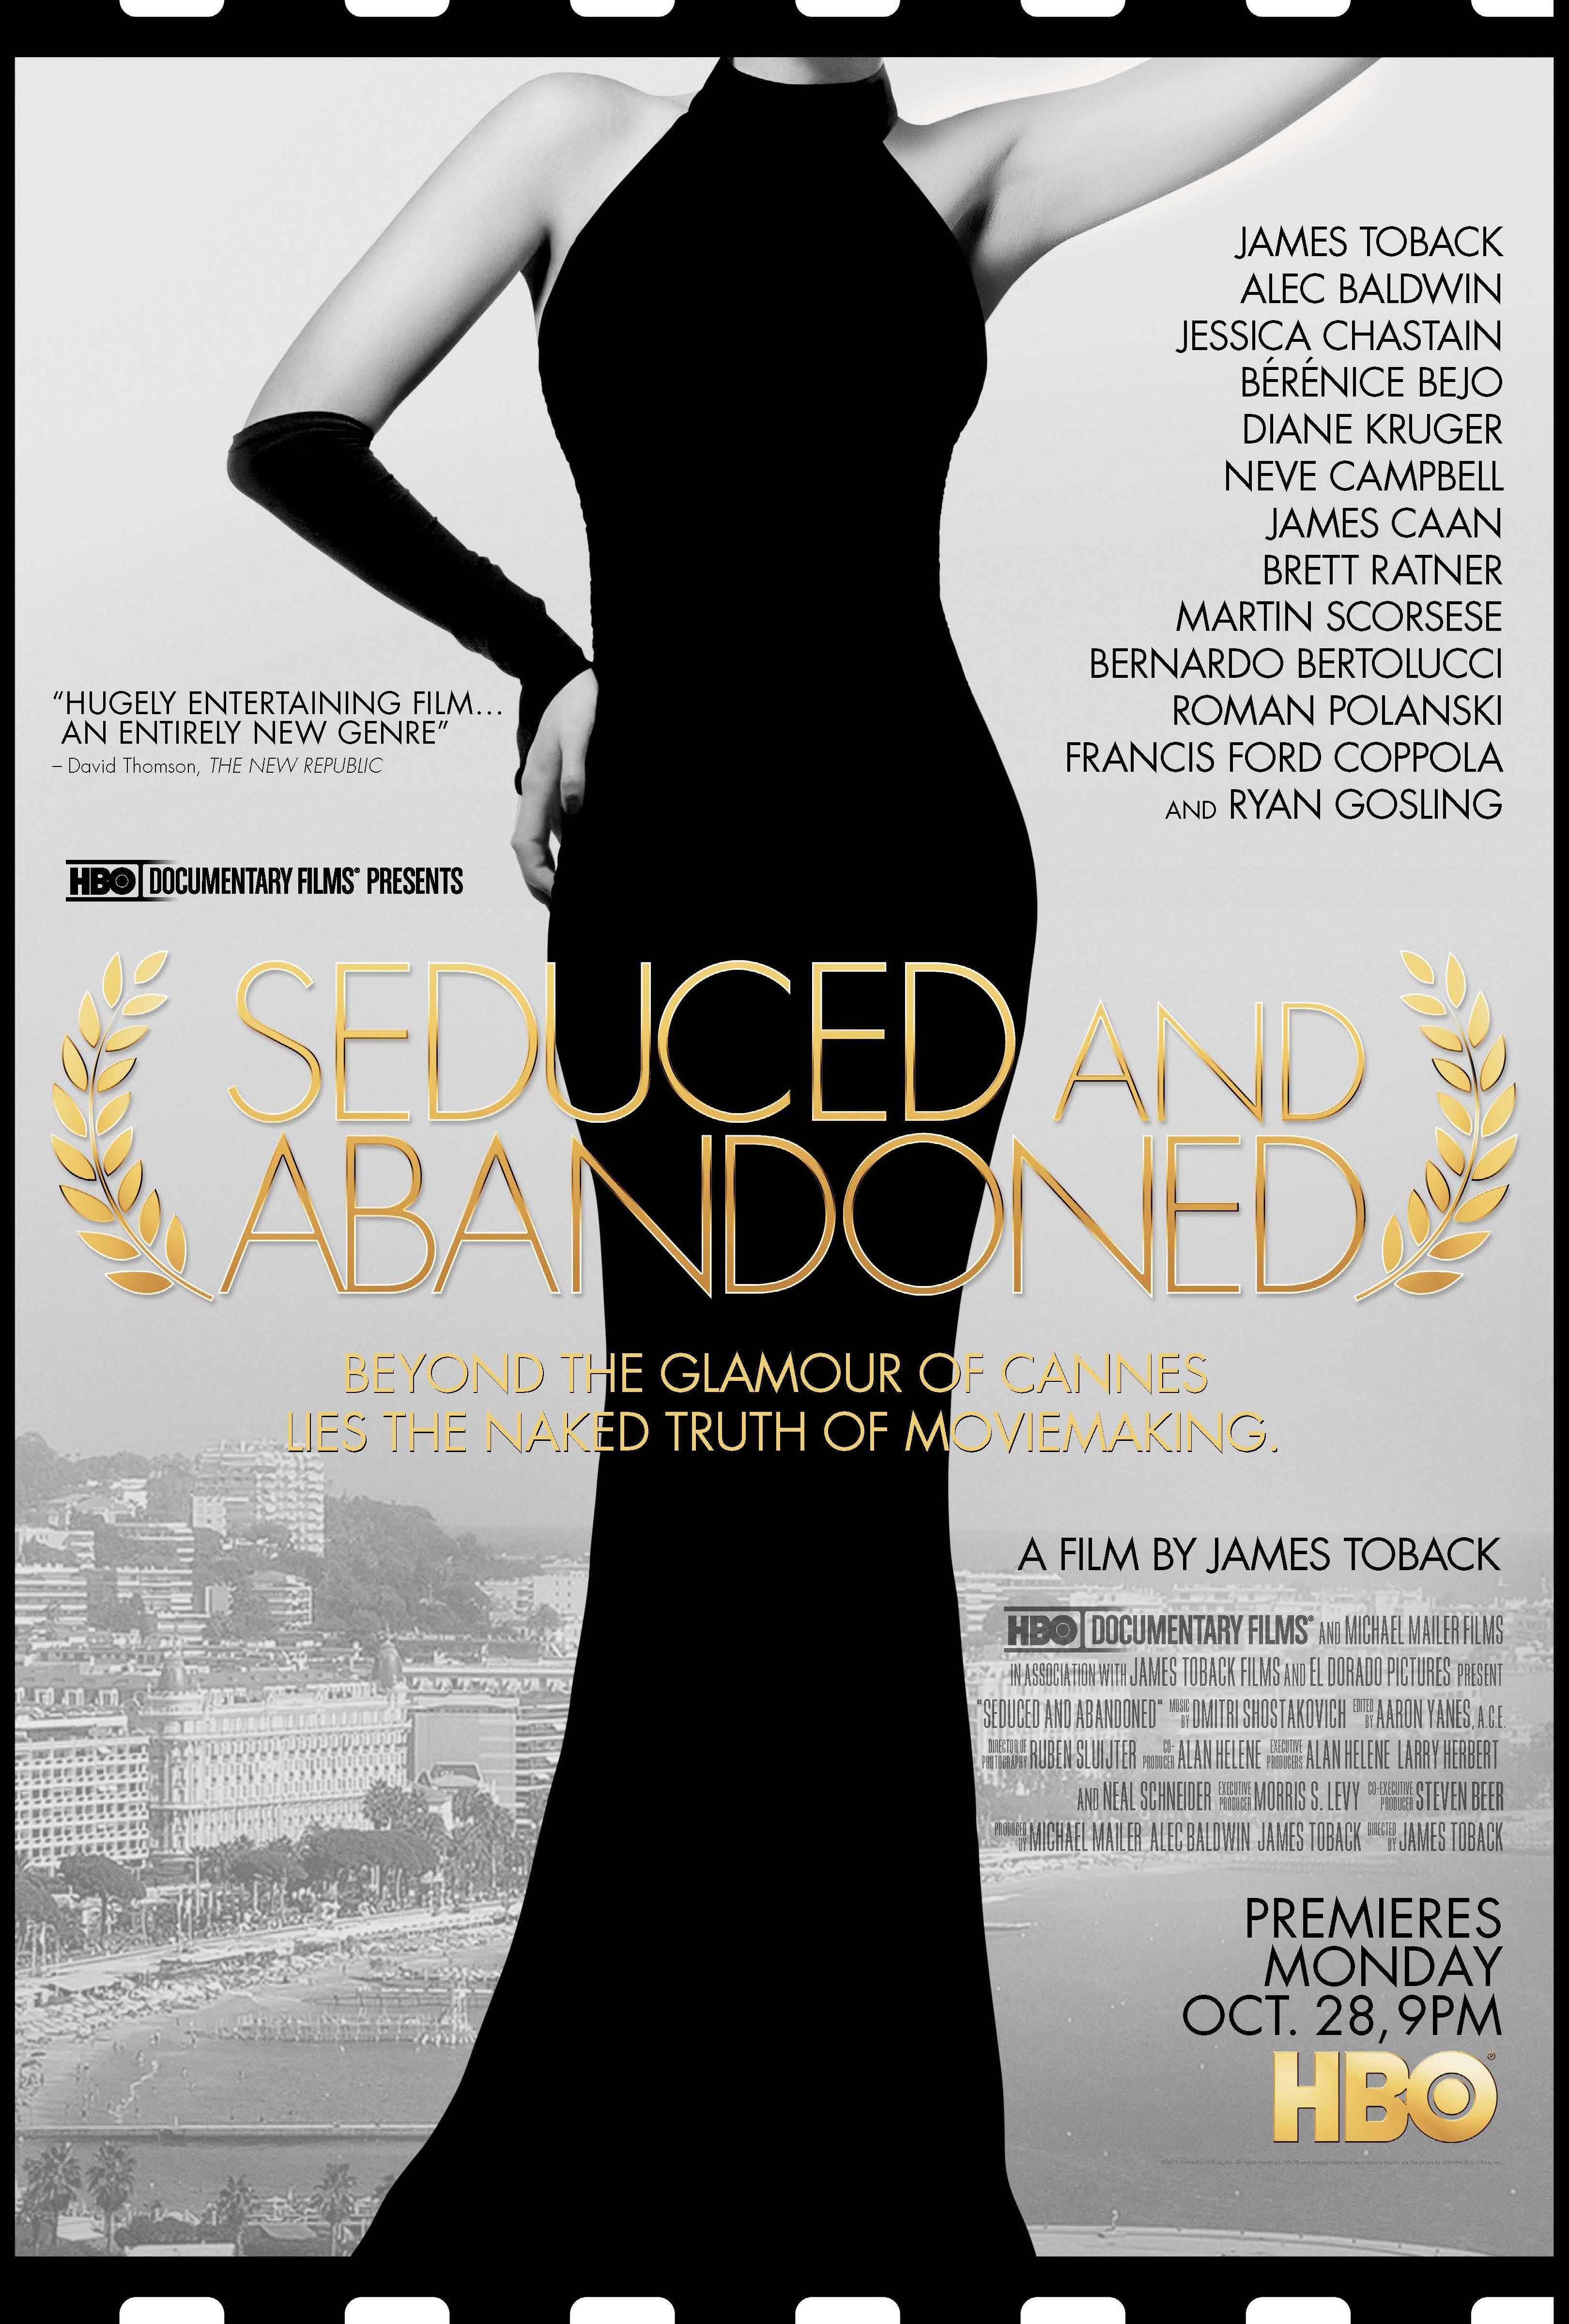 Poster of the movie Seduced and Abandoned